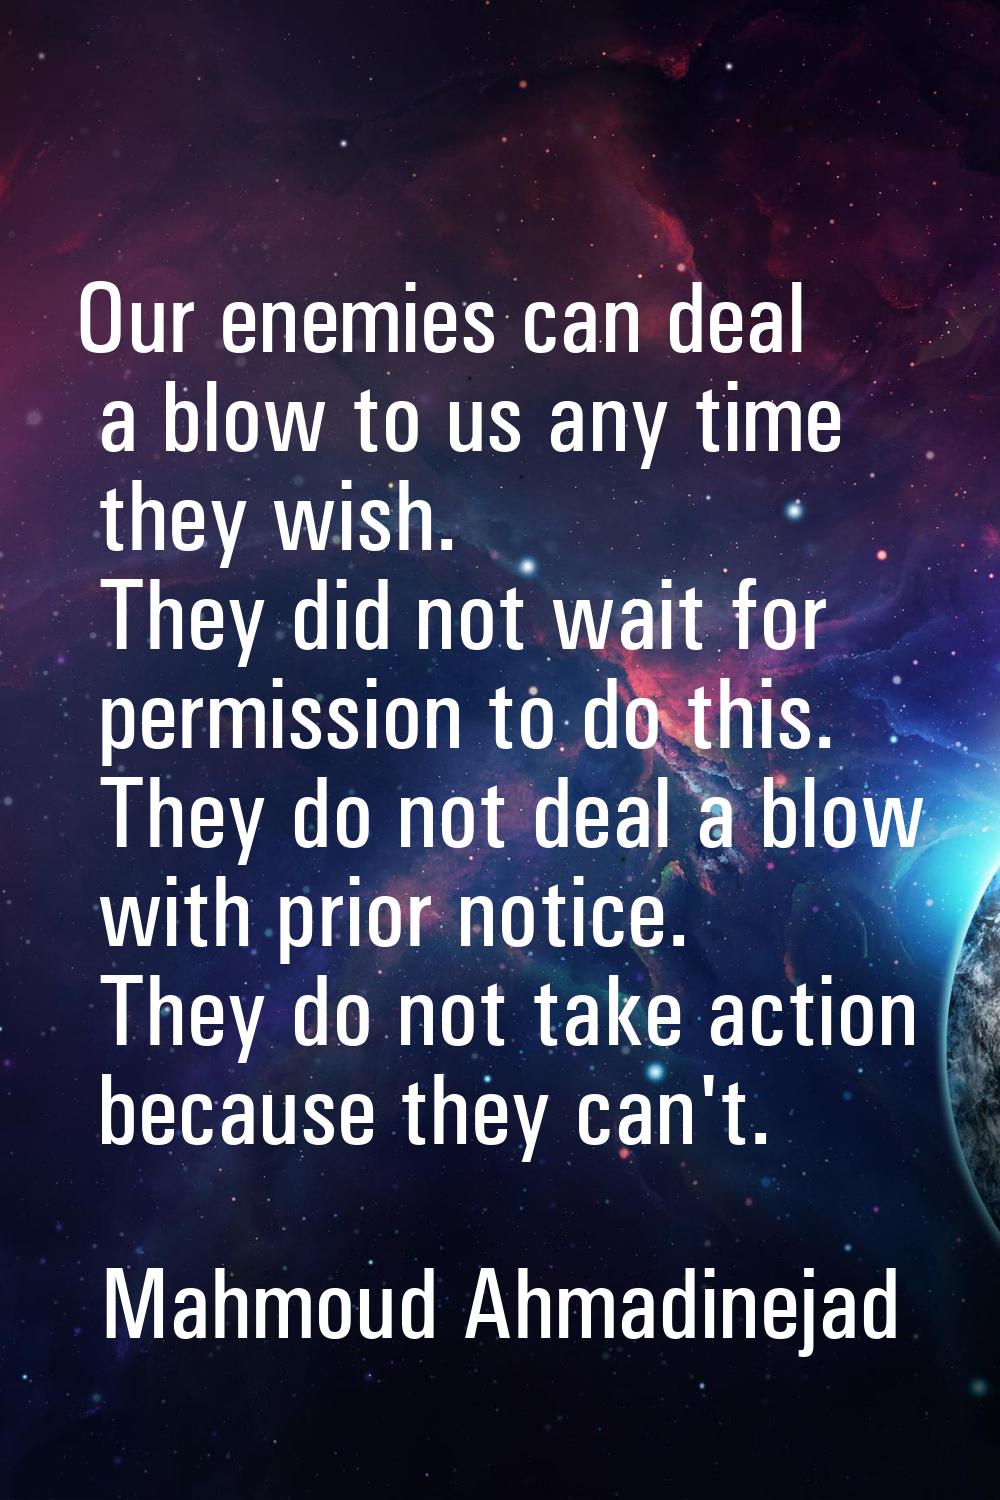 Our enemies can deal a blow to us any time they wish. They did not wait for permission to do this. 